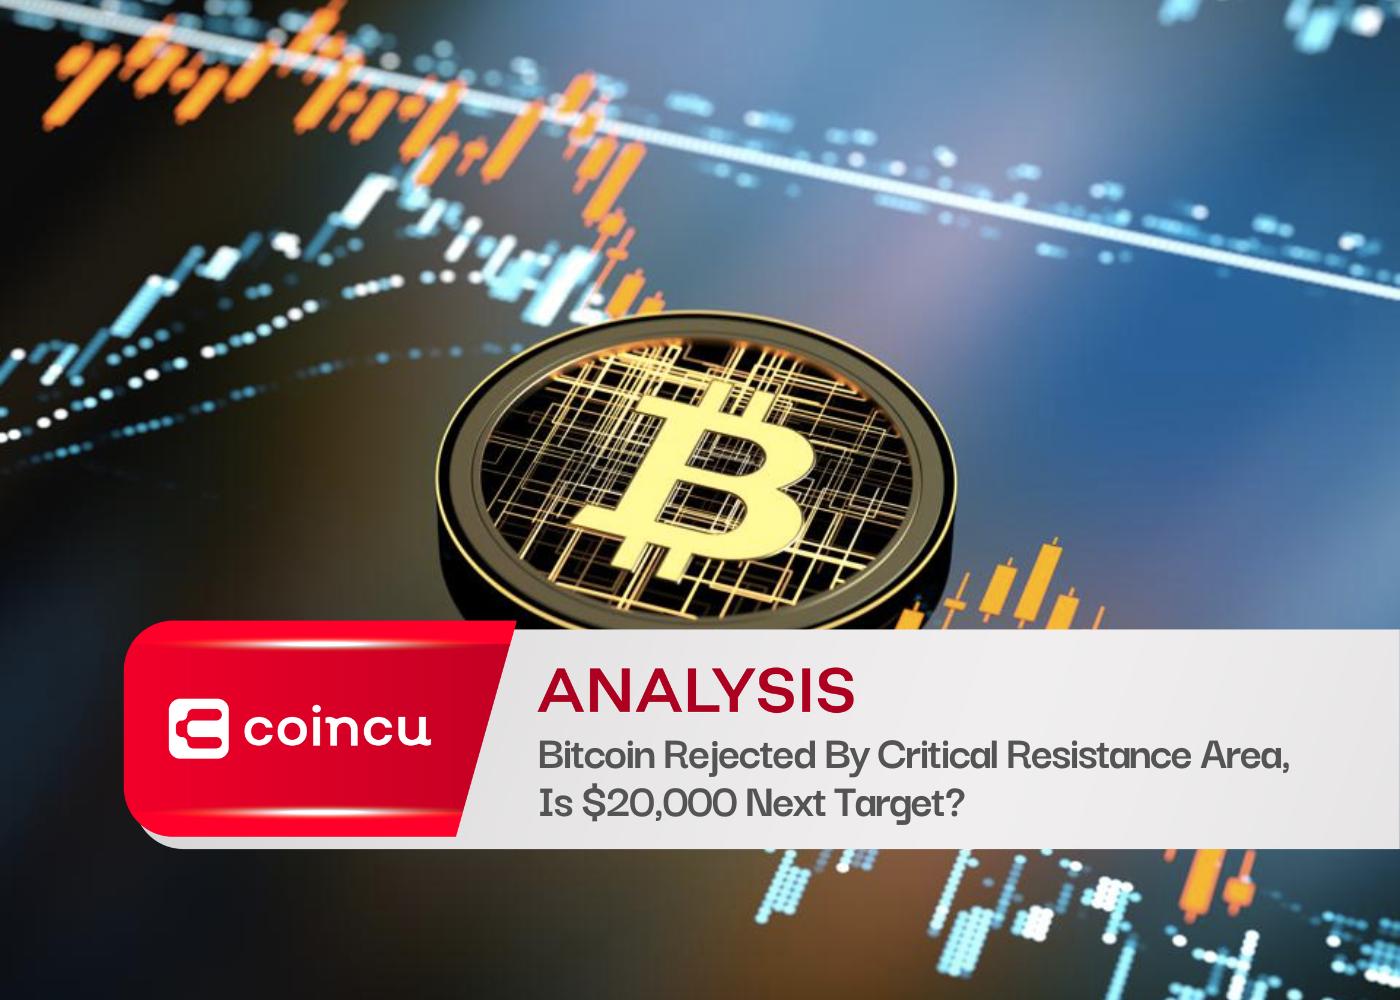 Bitcoin Rejected By Critical Resistance Area, Is $20,000 Next Target?